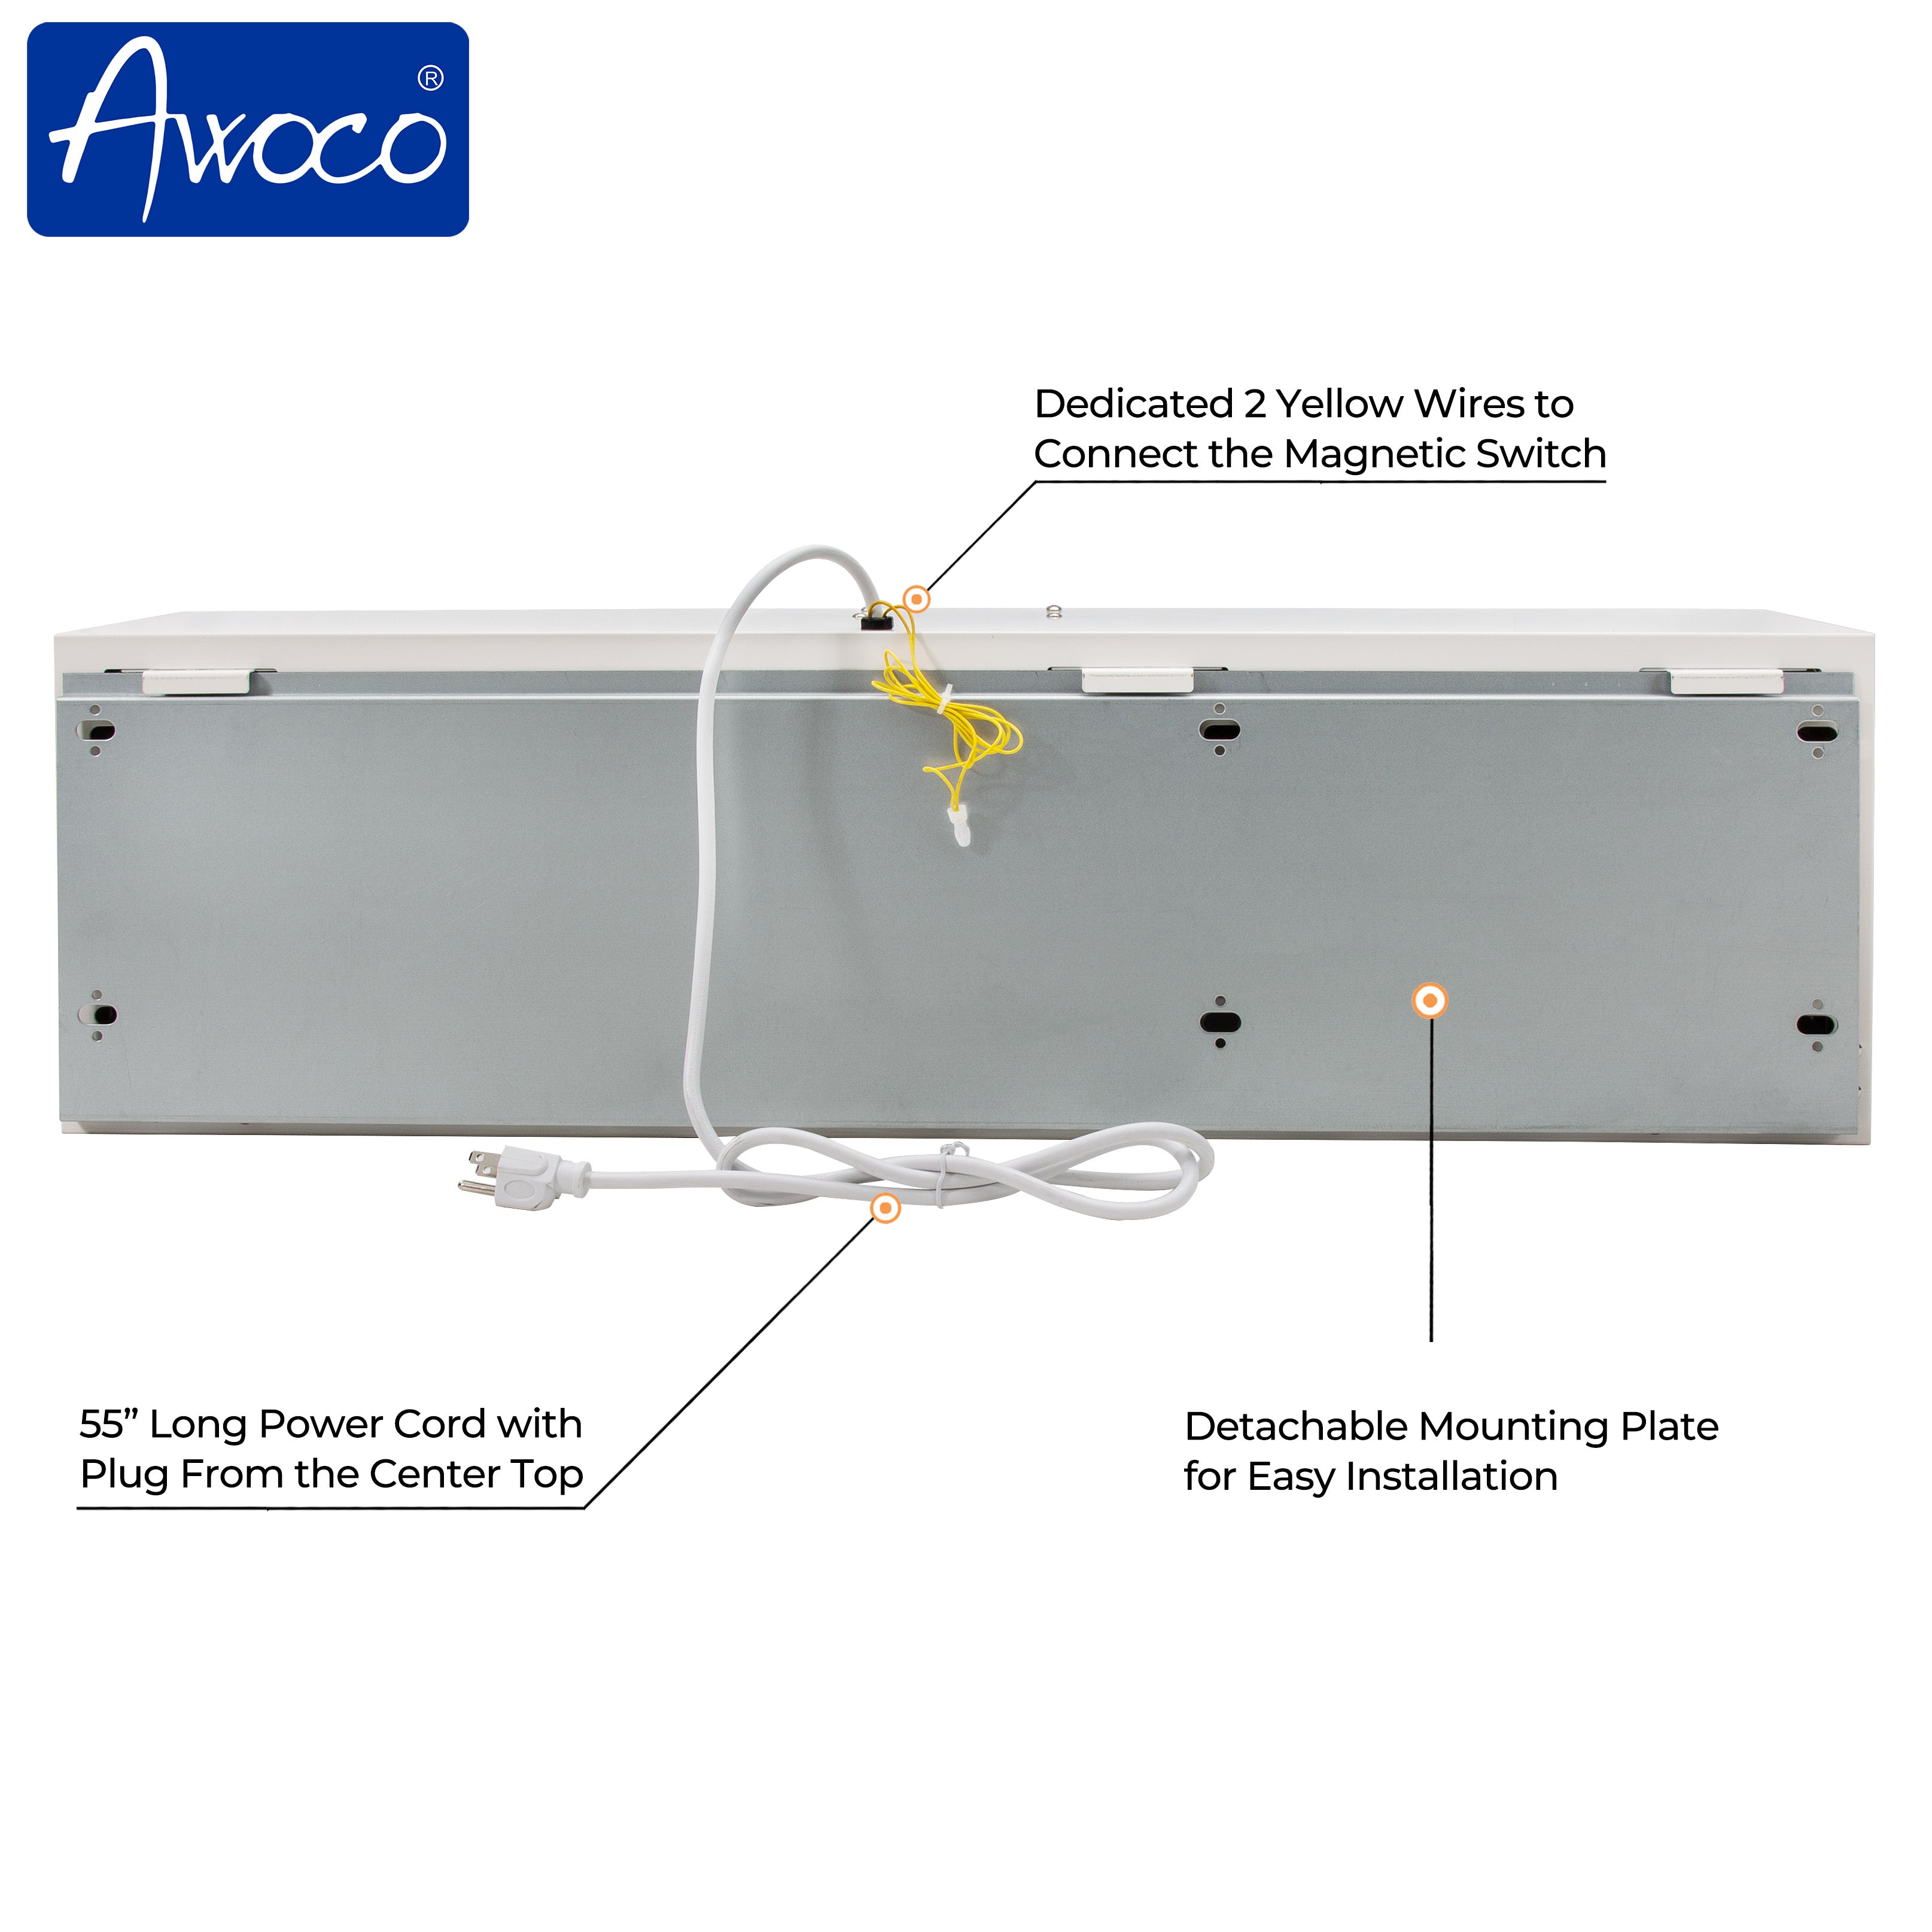 Awoco 36" Super Power 1 Speed 1200 CFM Commercial Indoor Air Curtain, 120V Unheated, ETL & UL Certified to Meet NSF 37 Food Service Standard